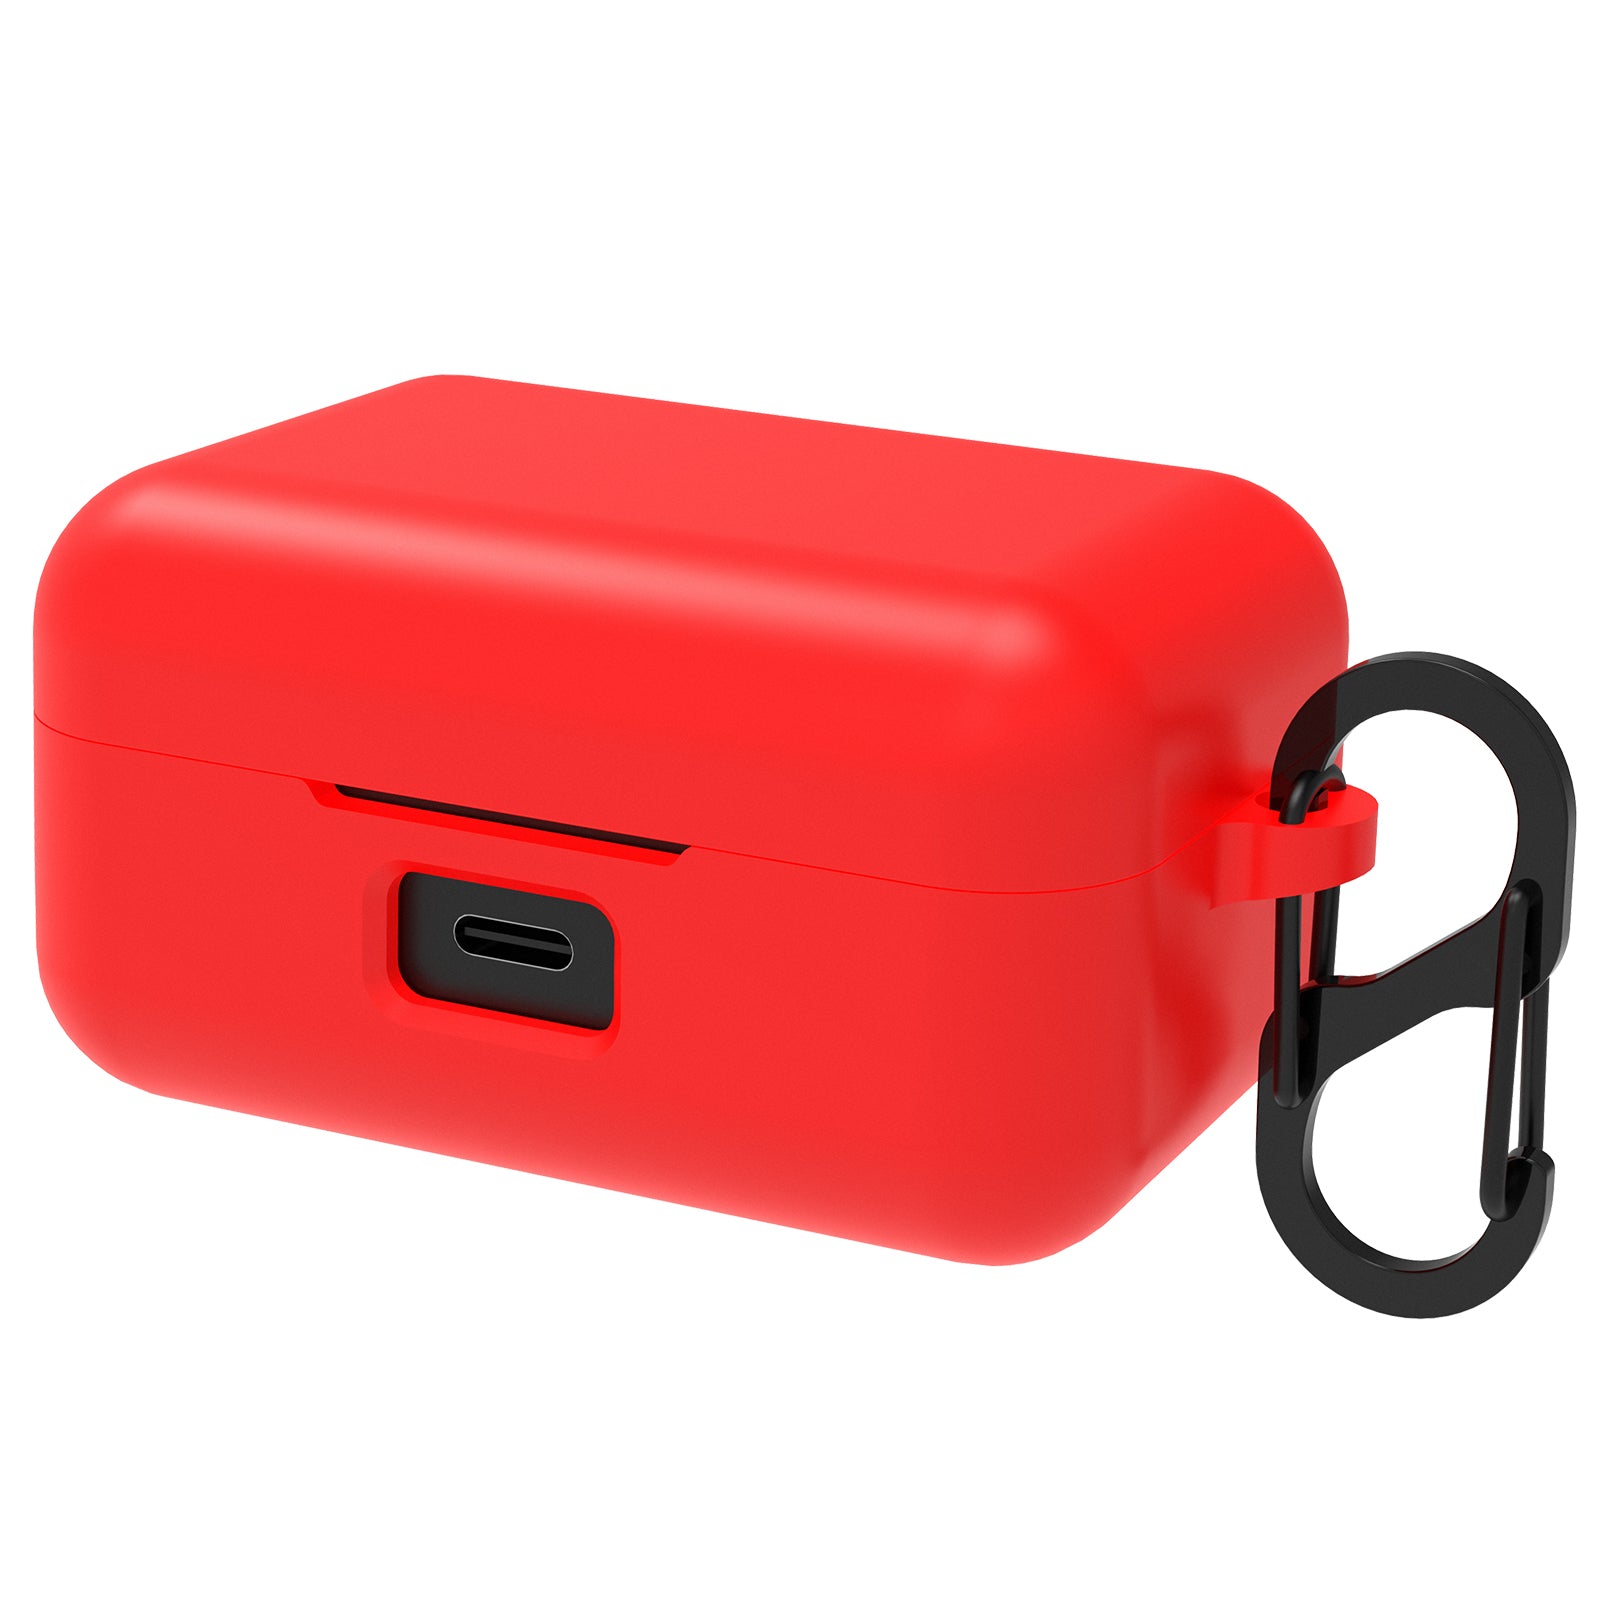 For Xiaomi Redmi Buds 5 Pro Silicone Case Bluetooth Headset Sleeve Earphone  Cover with Buckle - Red Wholesale